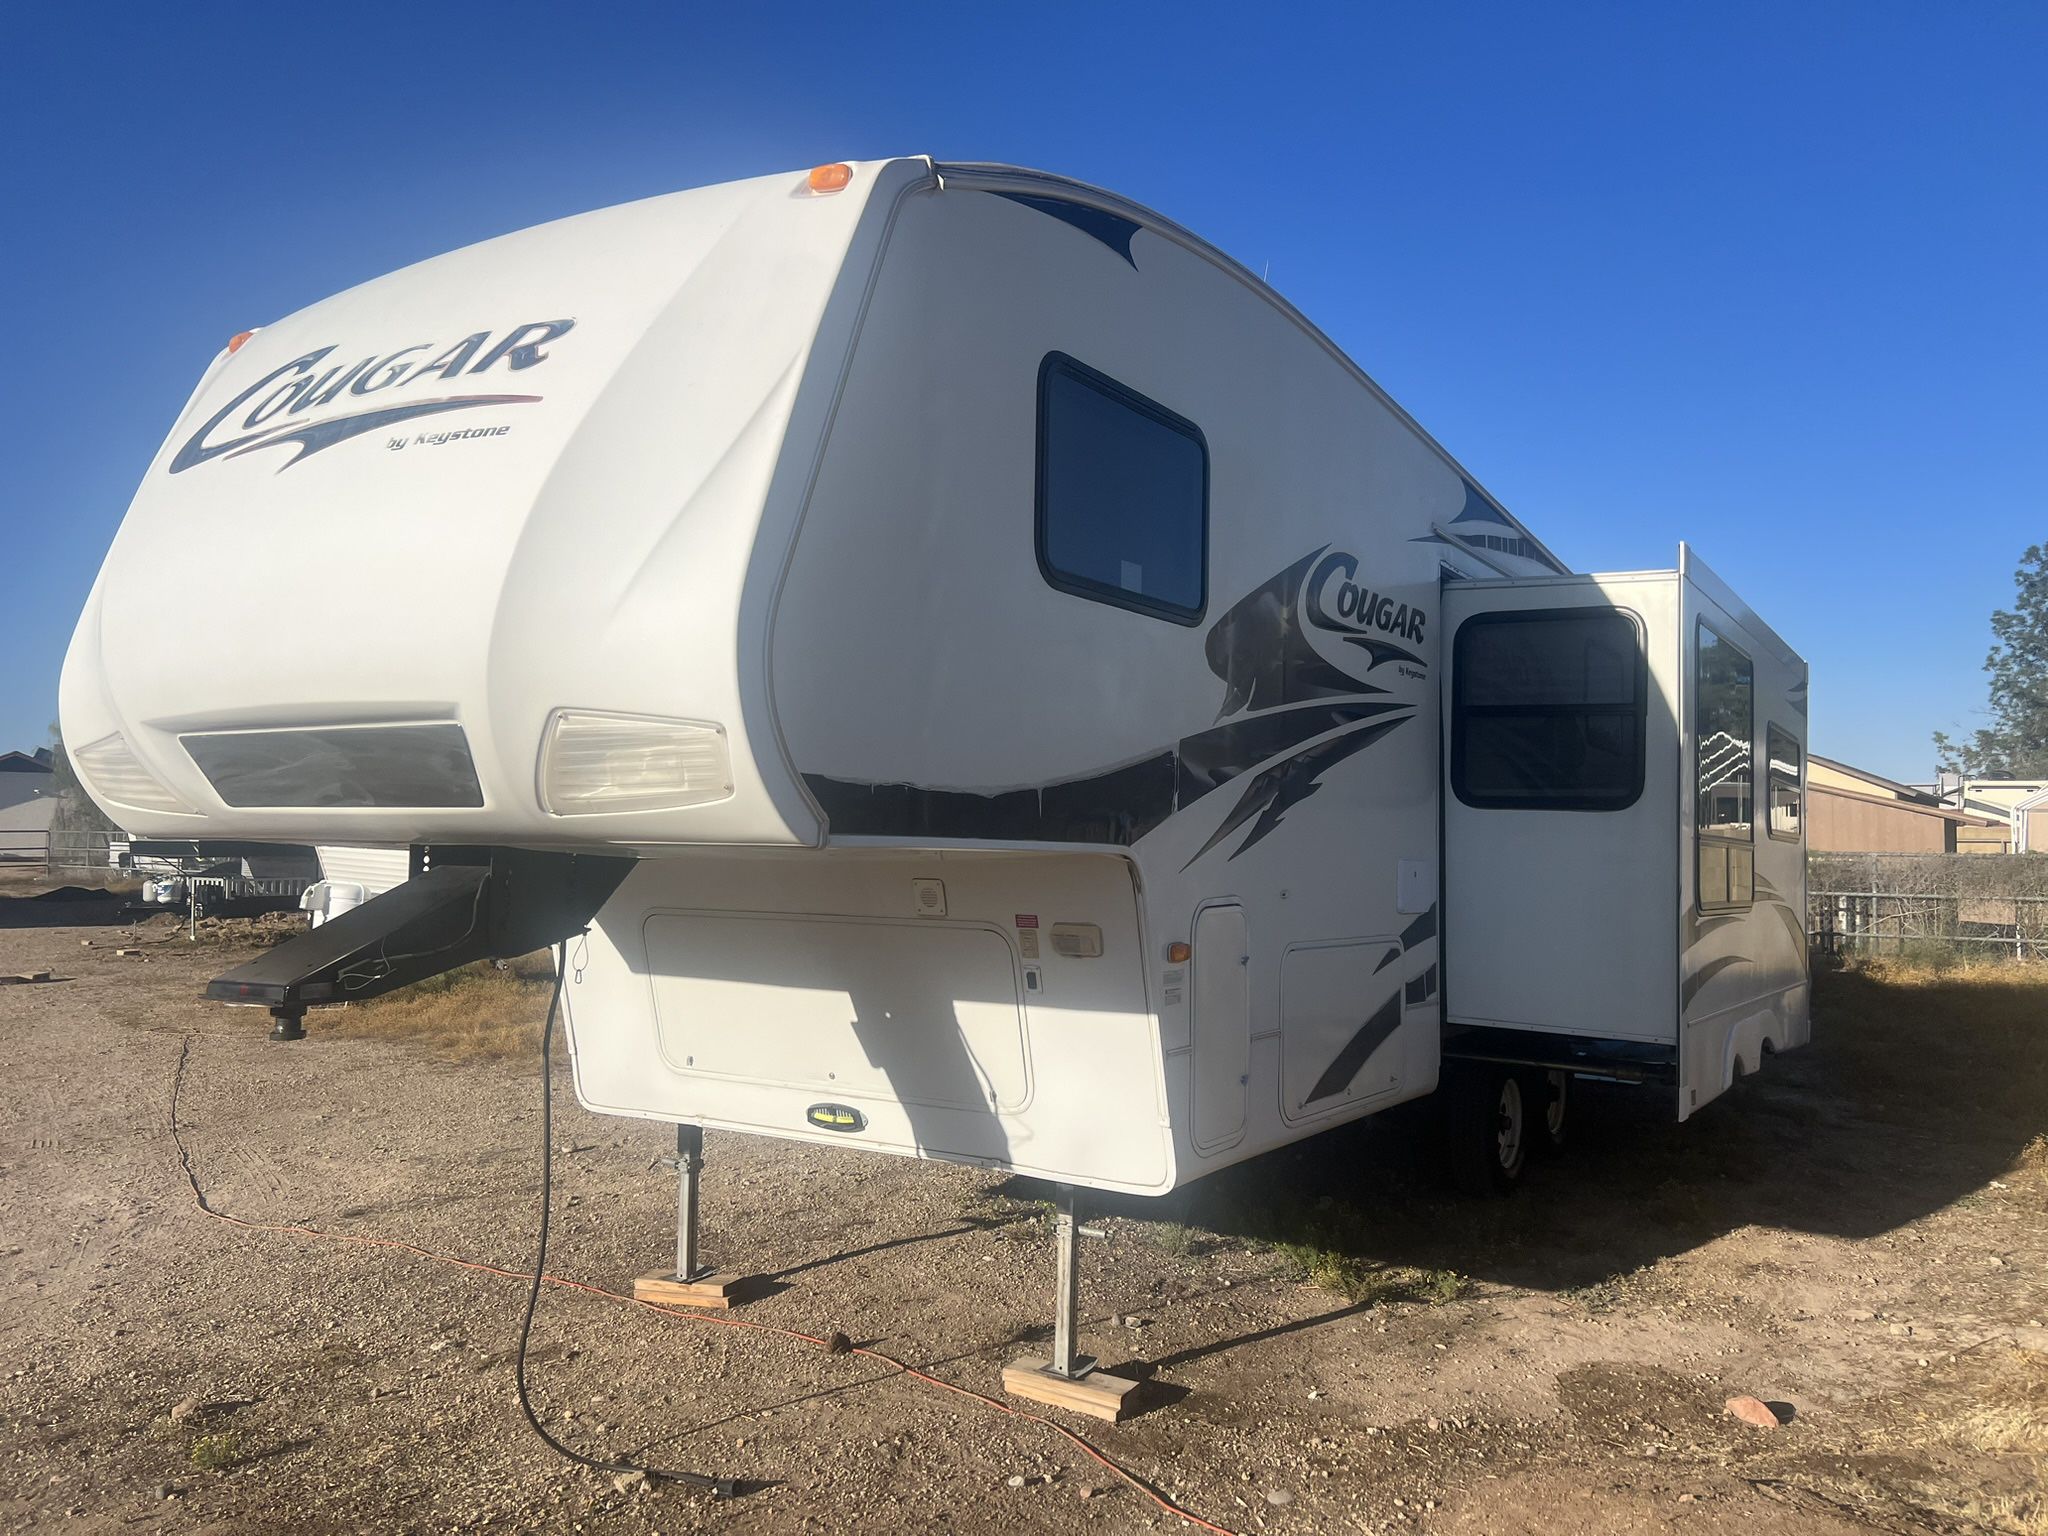 2008 cougar 29 foot fifth wheel travel trailer with polar package half ton towable looks great